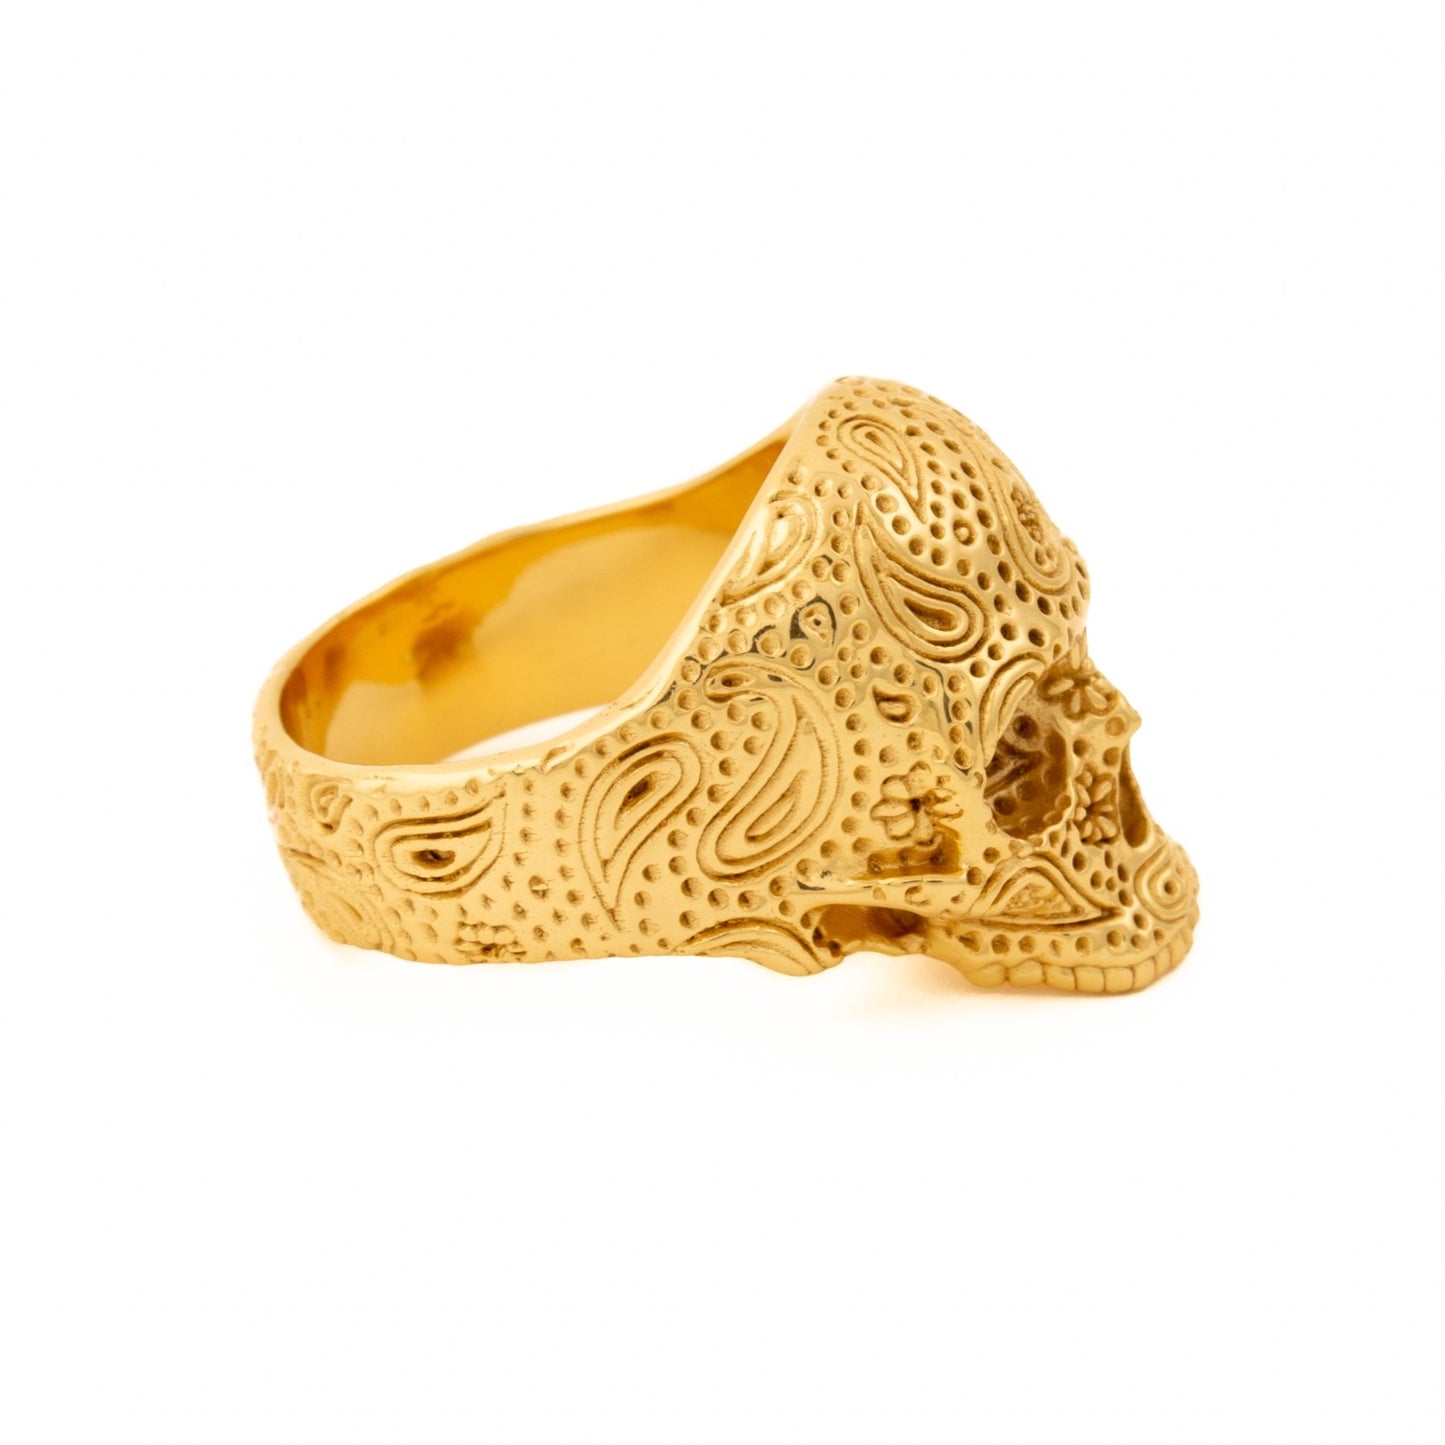 Gold "Lord Paisley" Skull Ring - Kingdom Jewelry